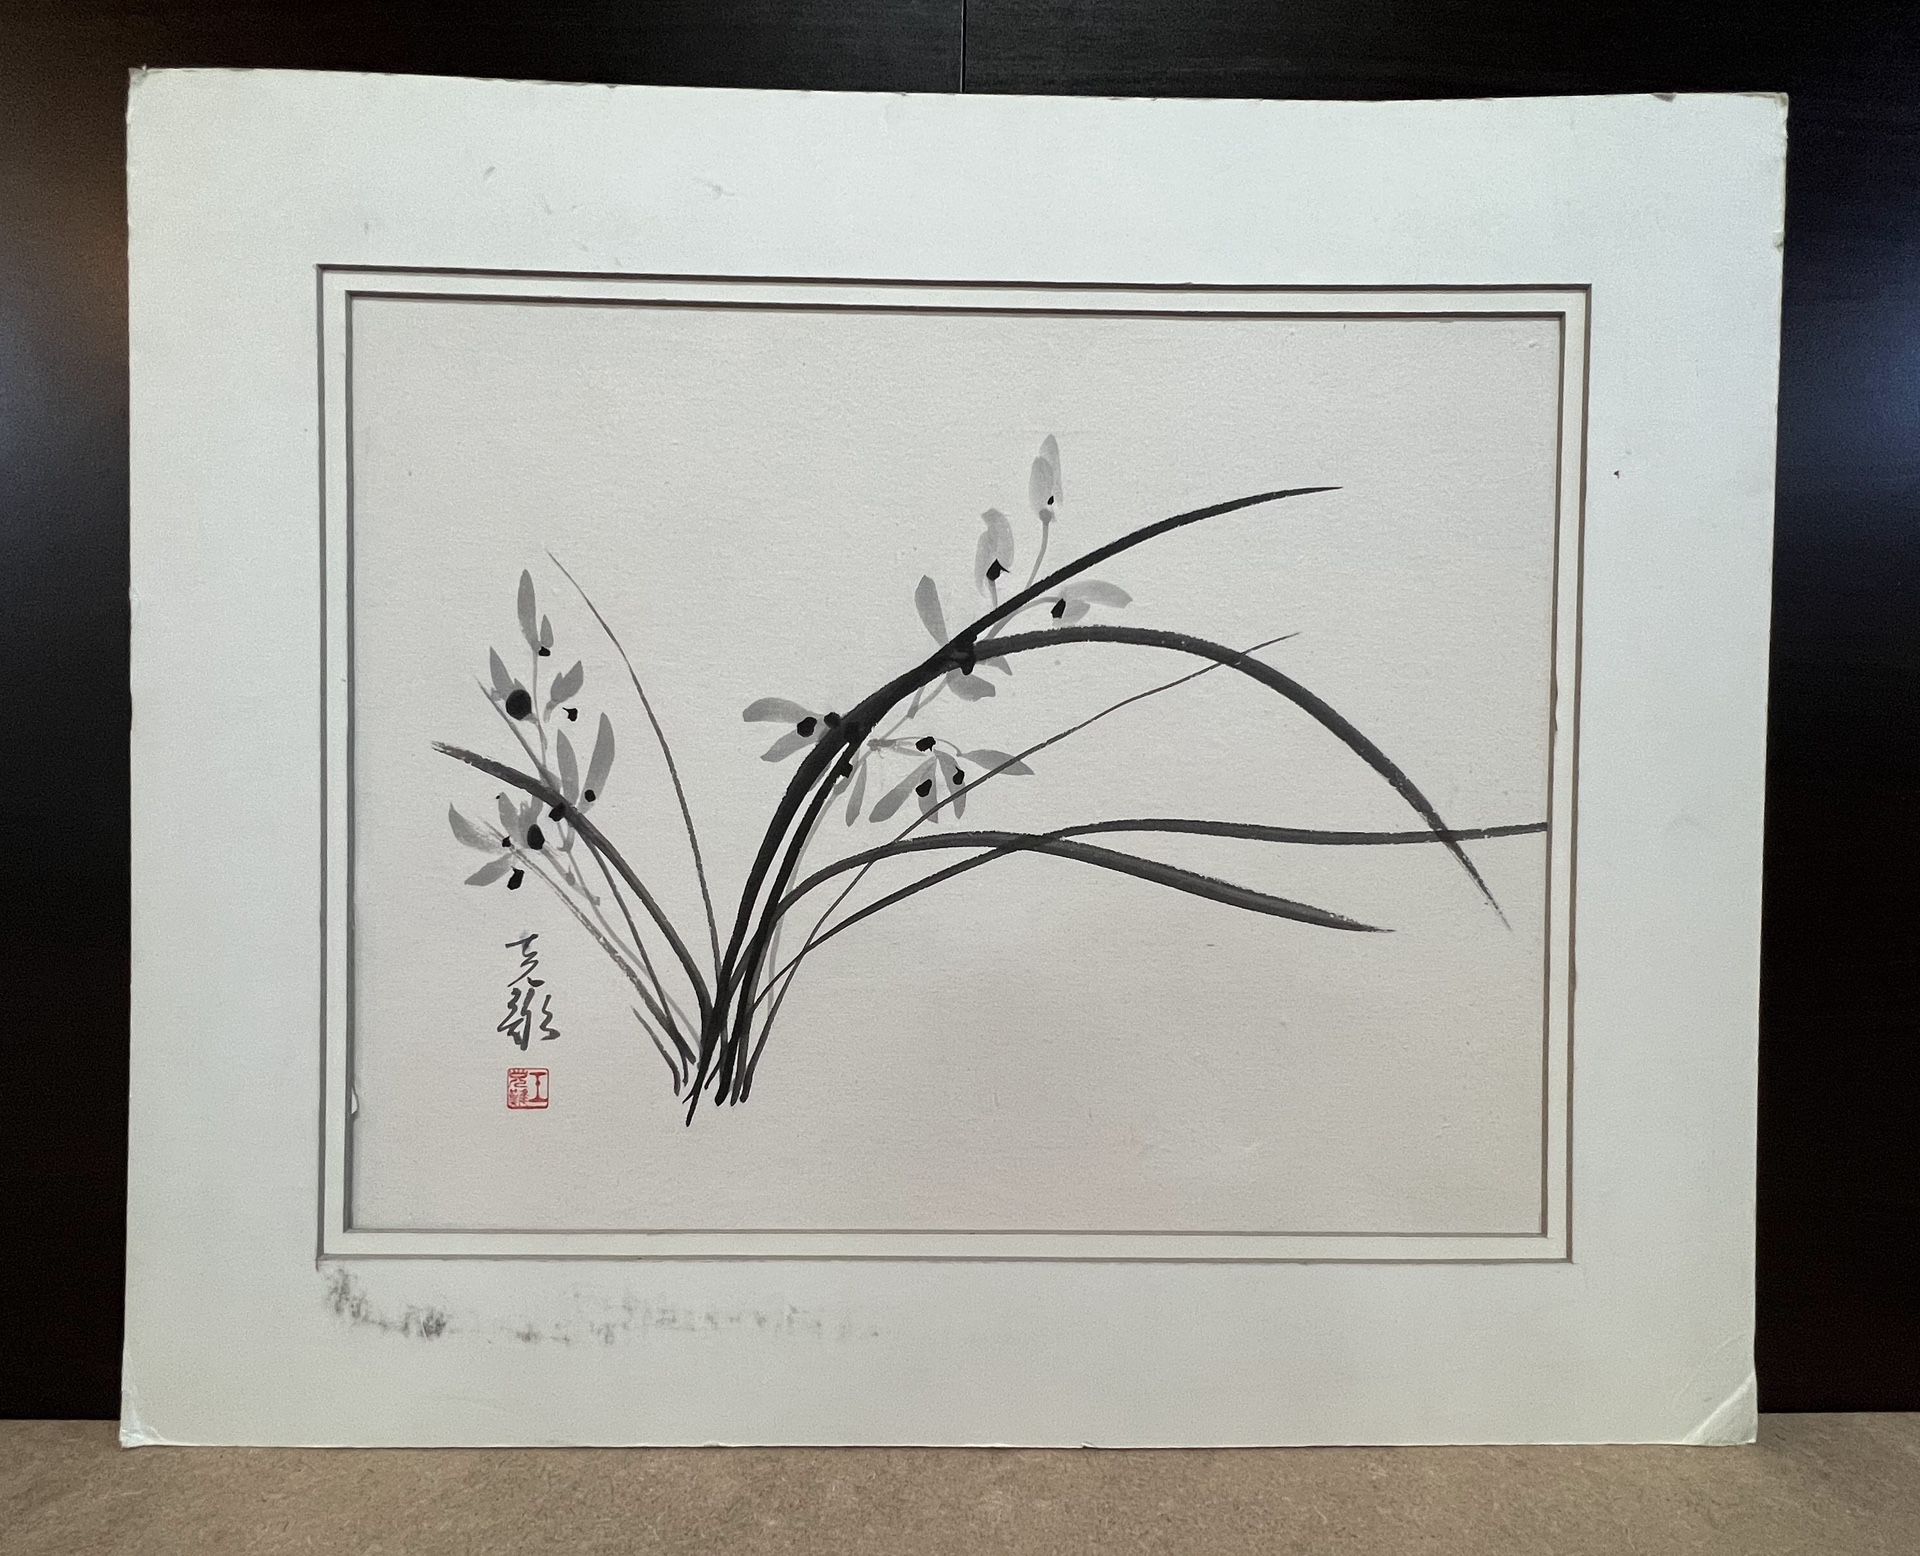 30% off SALE Original Oriental Painting of Plants in traditional black ink on white painting Board, hand signed & artist’s seal in red.